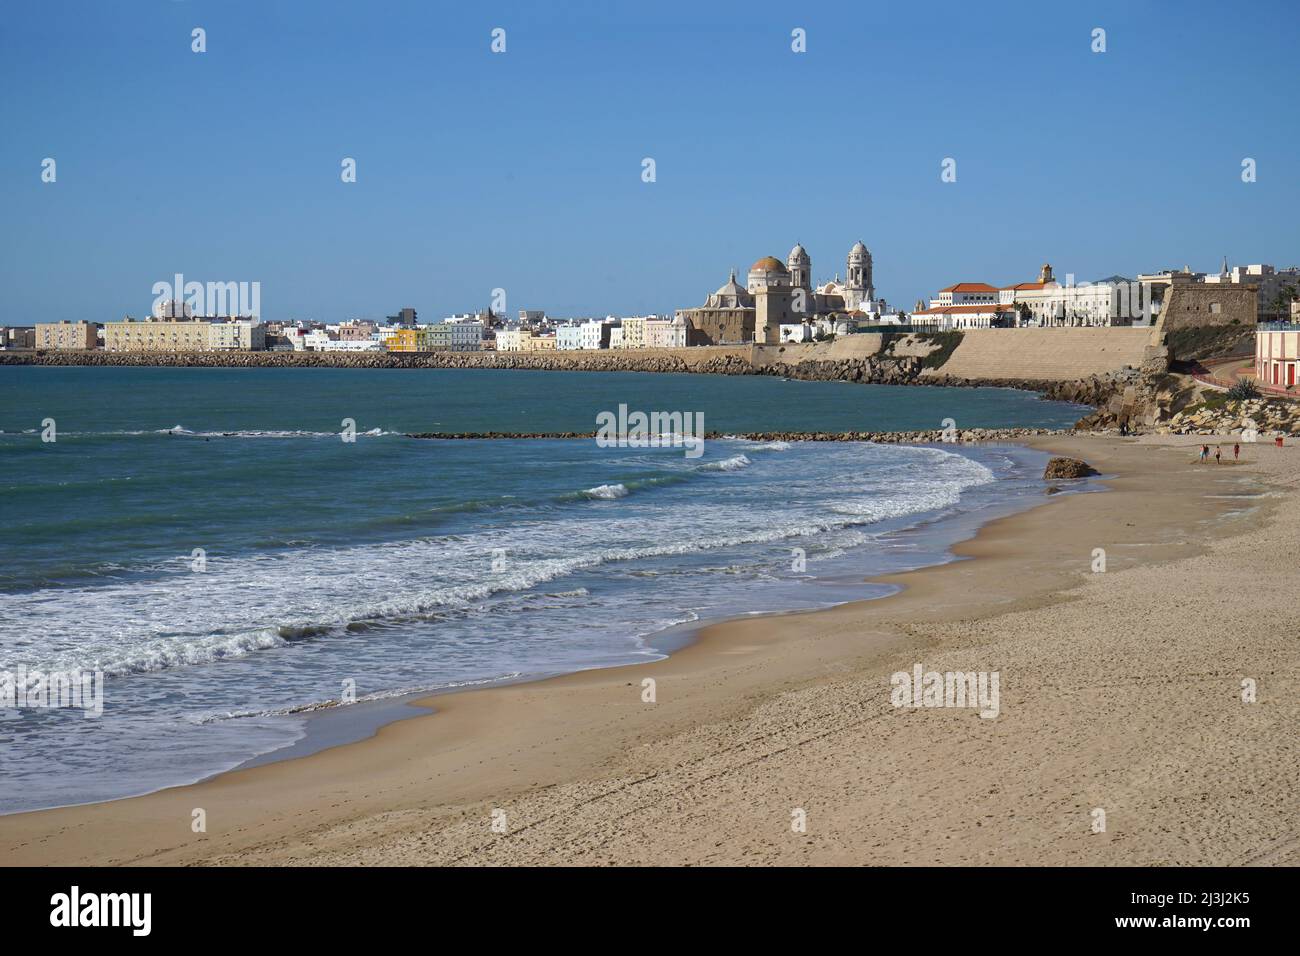 Sandy beach seafront, Cadiz, Spain with cathedral Stock Photo